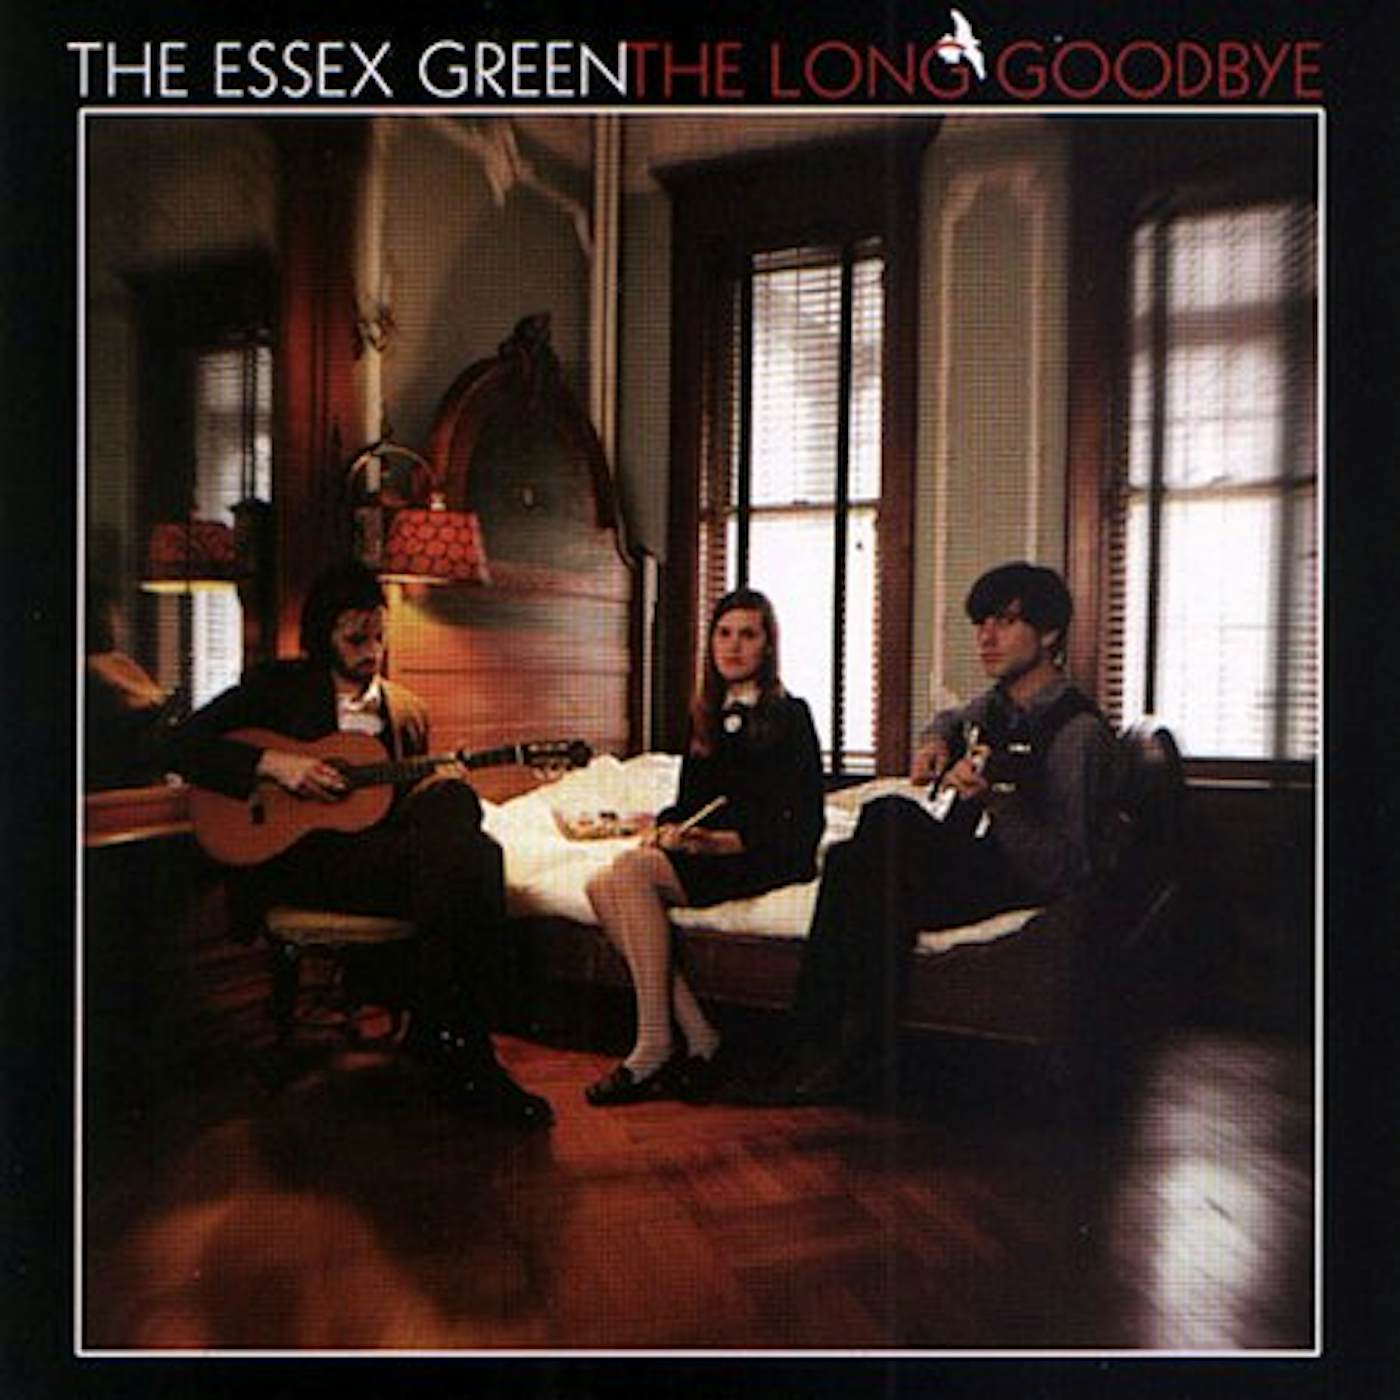 The Essex Green THE LONG GOODBYE CD